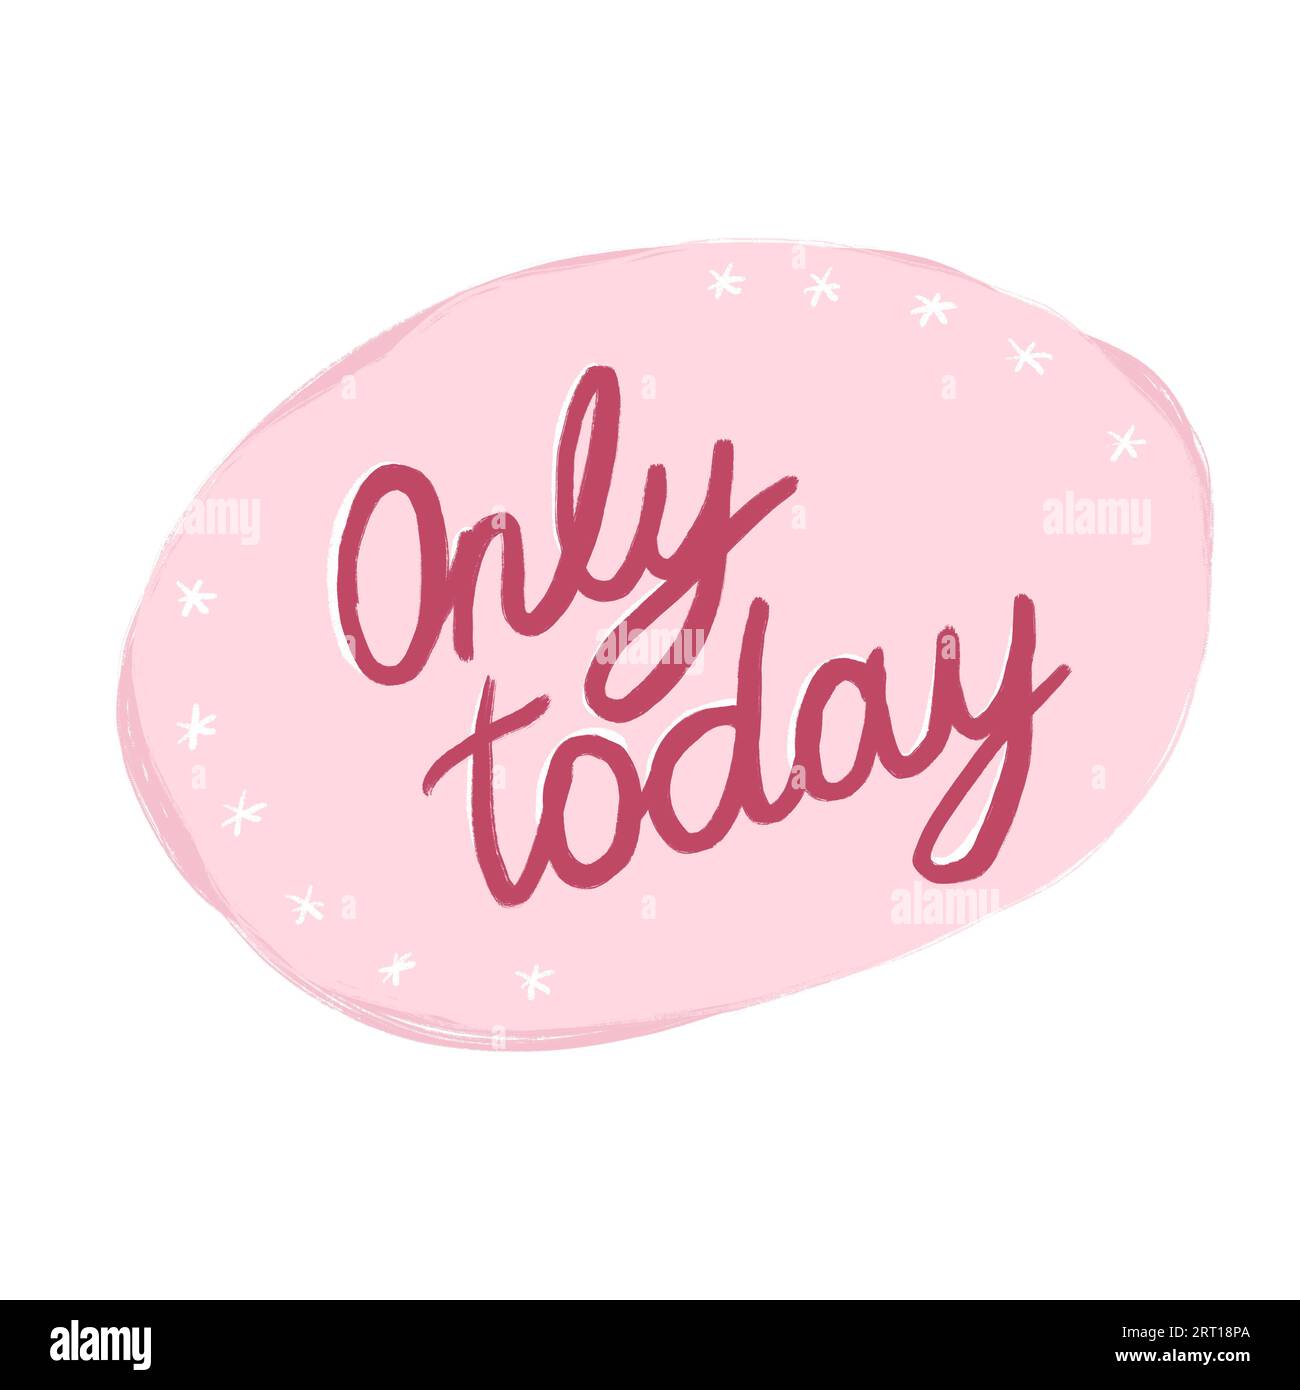 Hand drawn illustration with pink only today words phrase lettering and black clock on pastel background. Graphic design urgent opportunity inscription sale banner, typography modern quote business opportunity rush, round oval shape Stock Photo